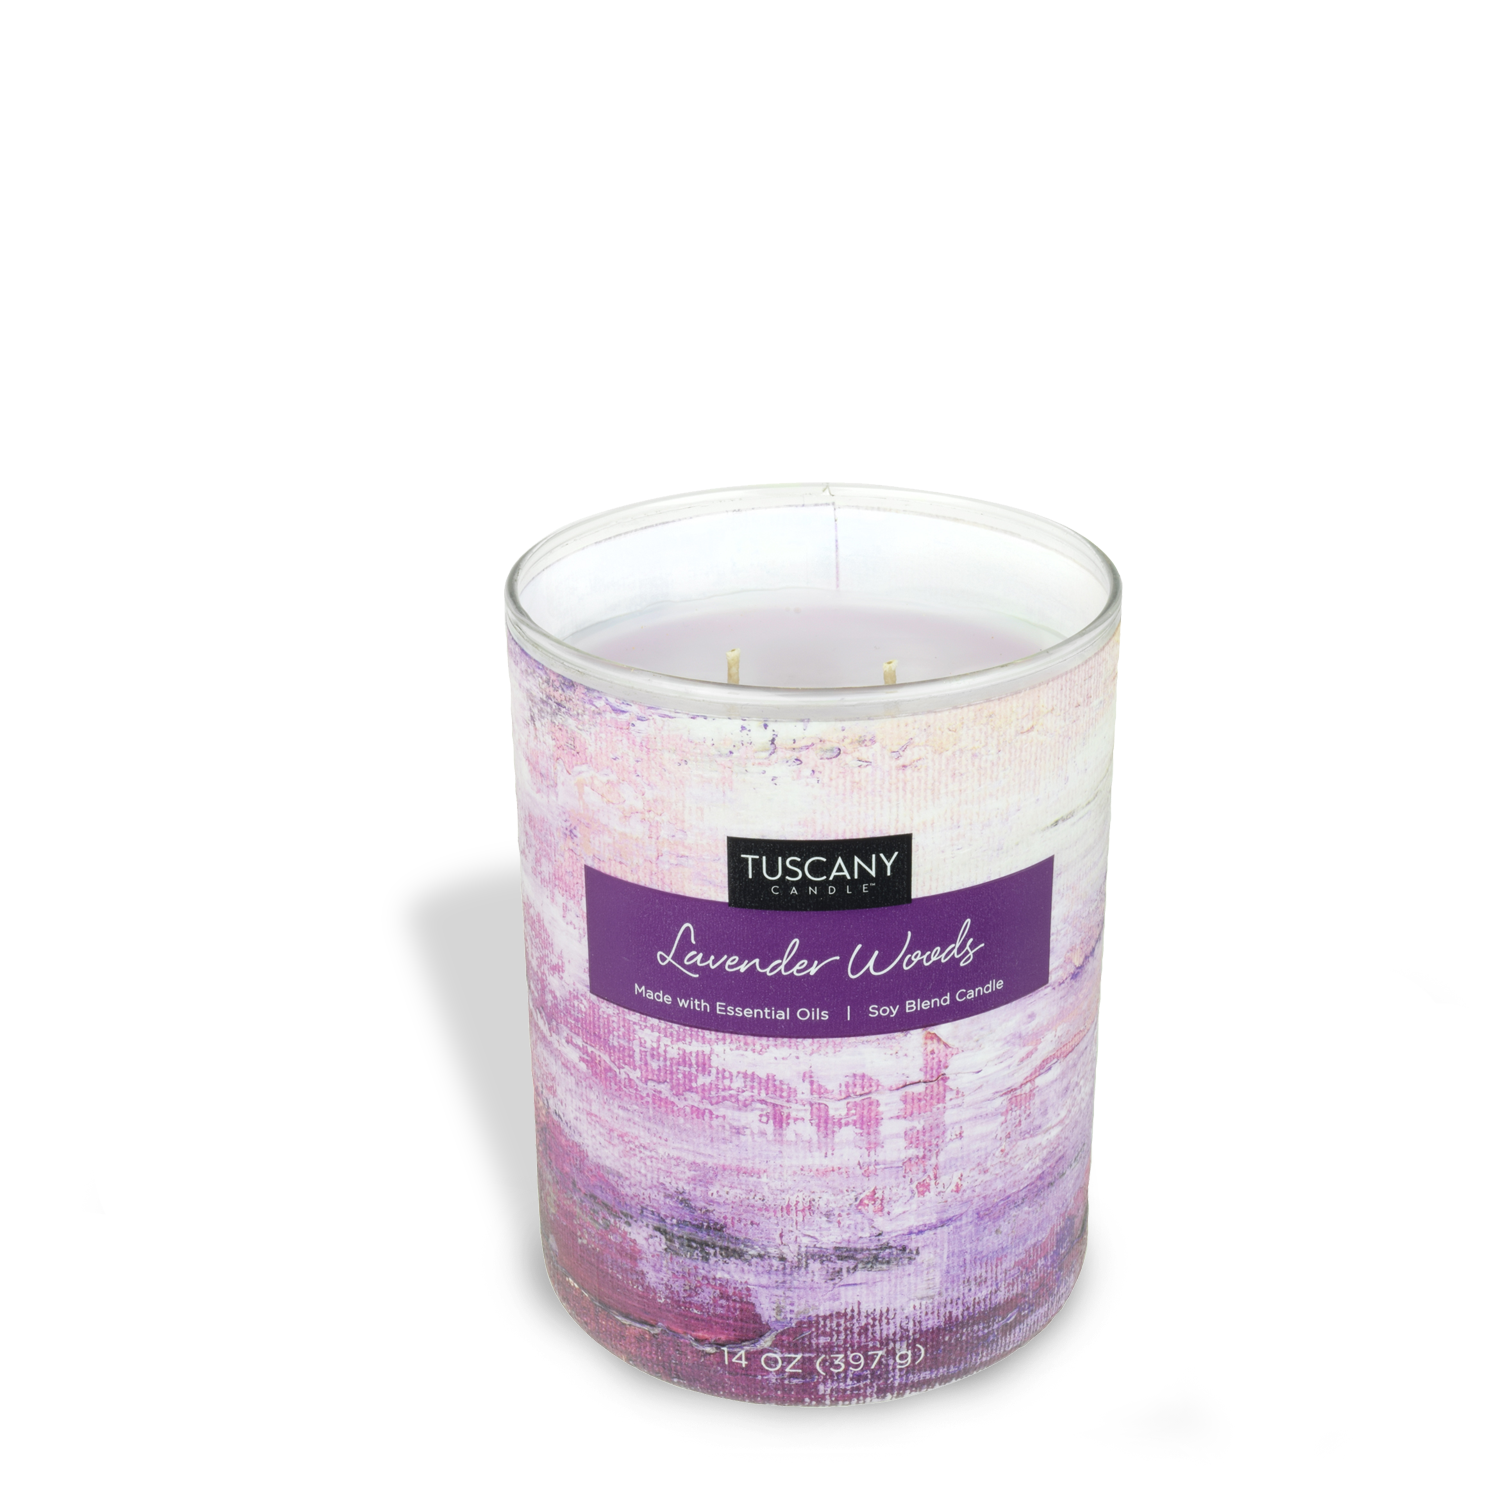 A Lavender Woods scented jar candle (14 oz) from the Tuscany Candle Home Décor Collection with a purple background on a white background.